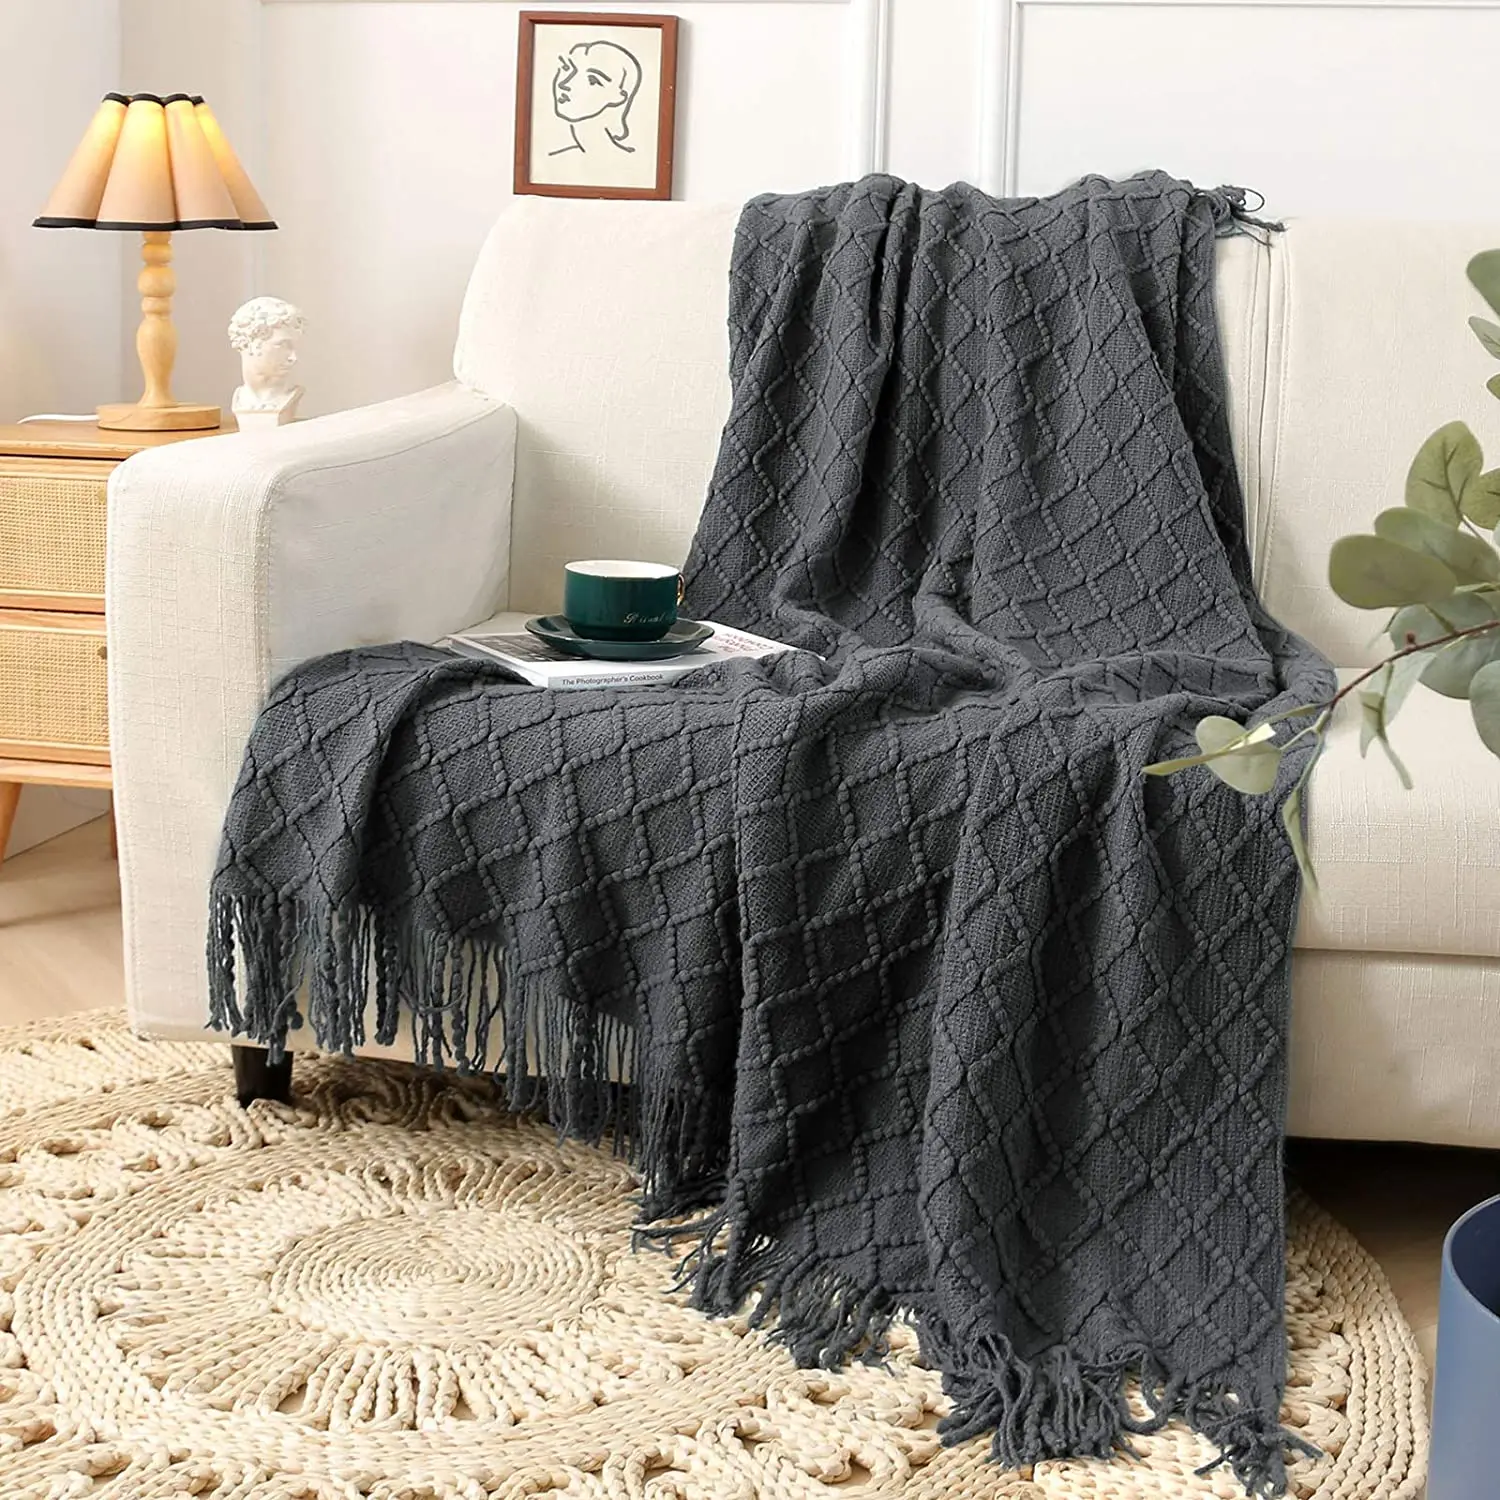 luxury throw Blanket Textured Solid Soft blanket for Sofa Couch Decorative Knitted Blanket for winter